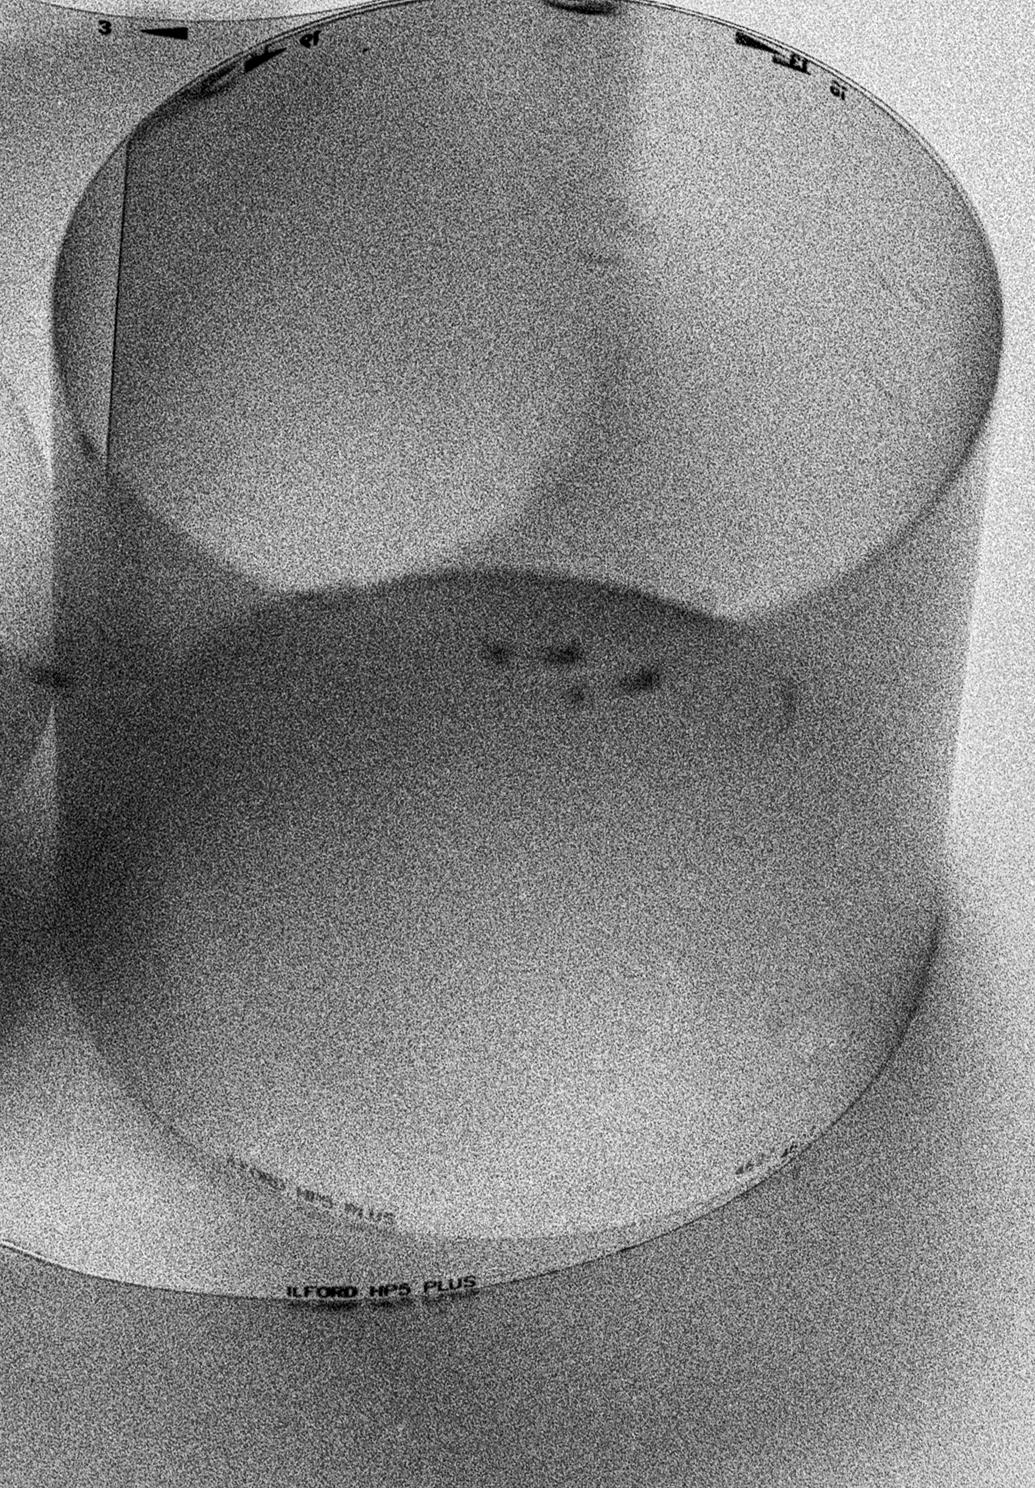 Egg Study 8. Still Life . Black and White Silver Gelatin Print - Gray Abstract Photograph by Shine Huang